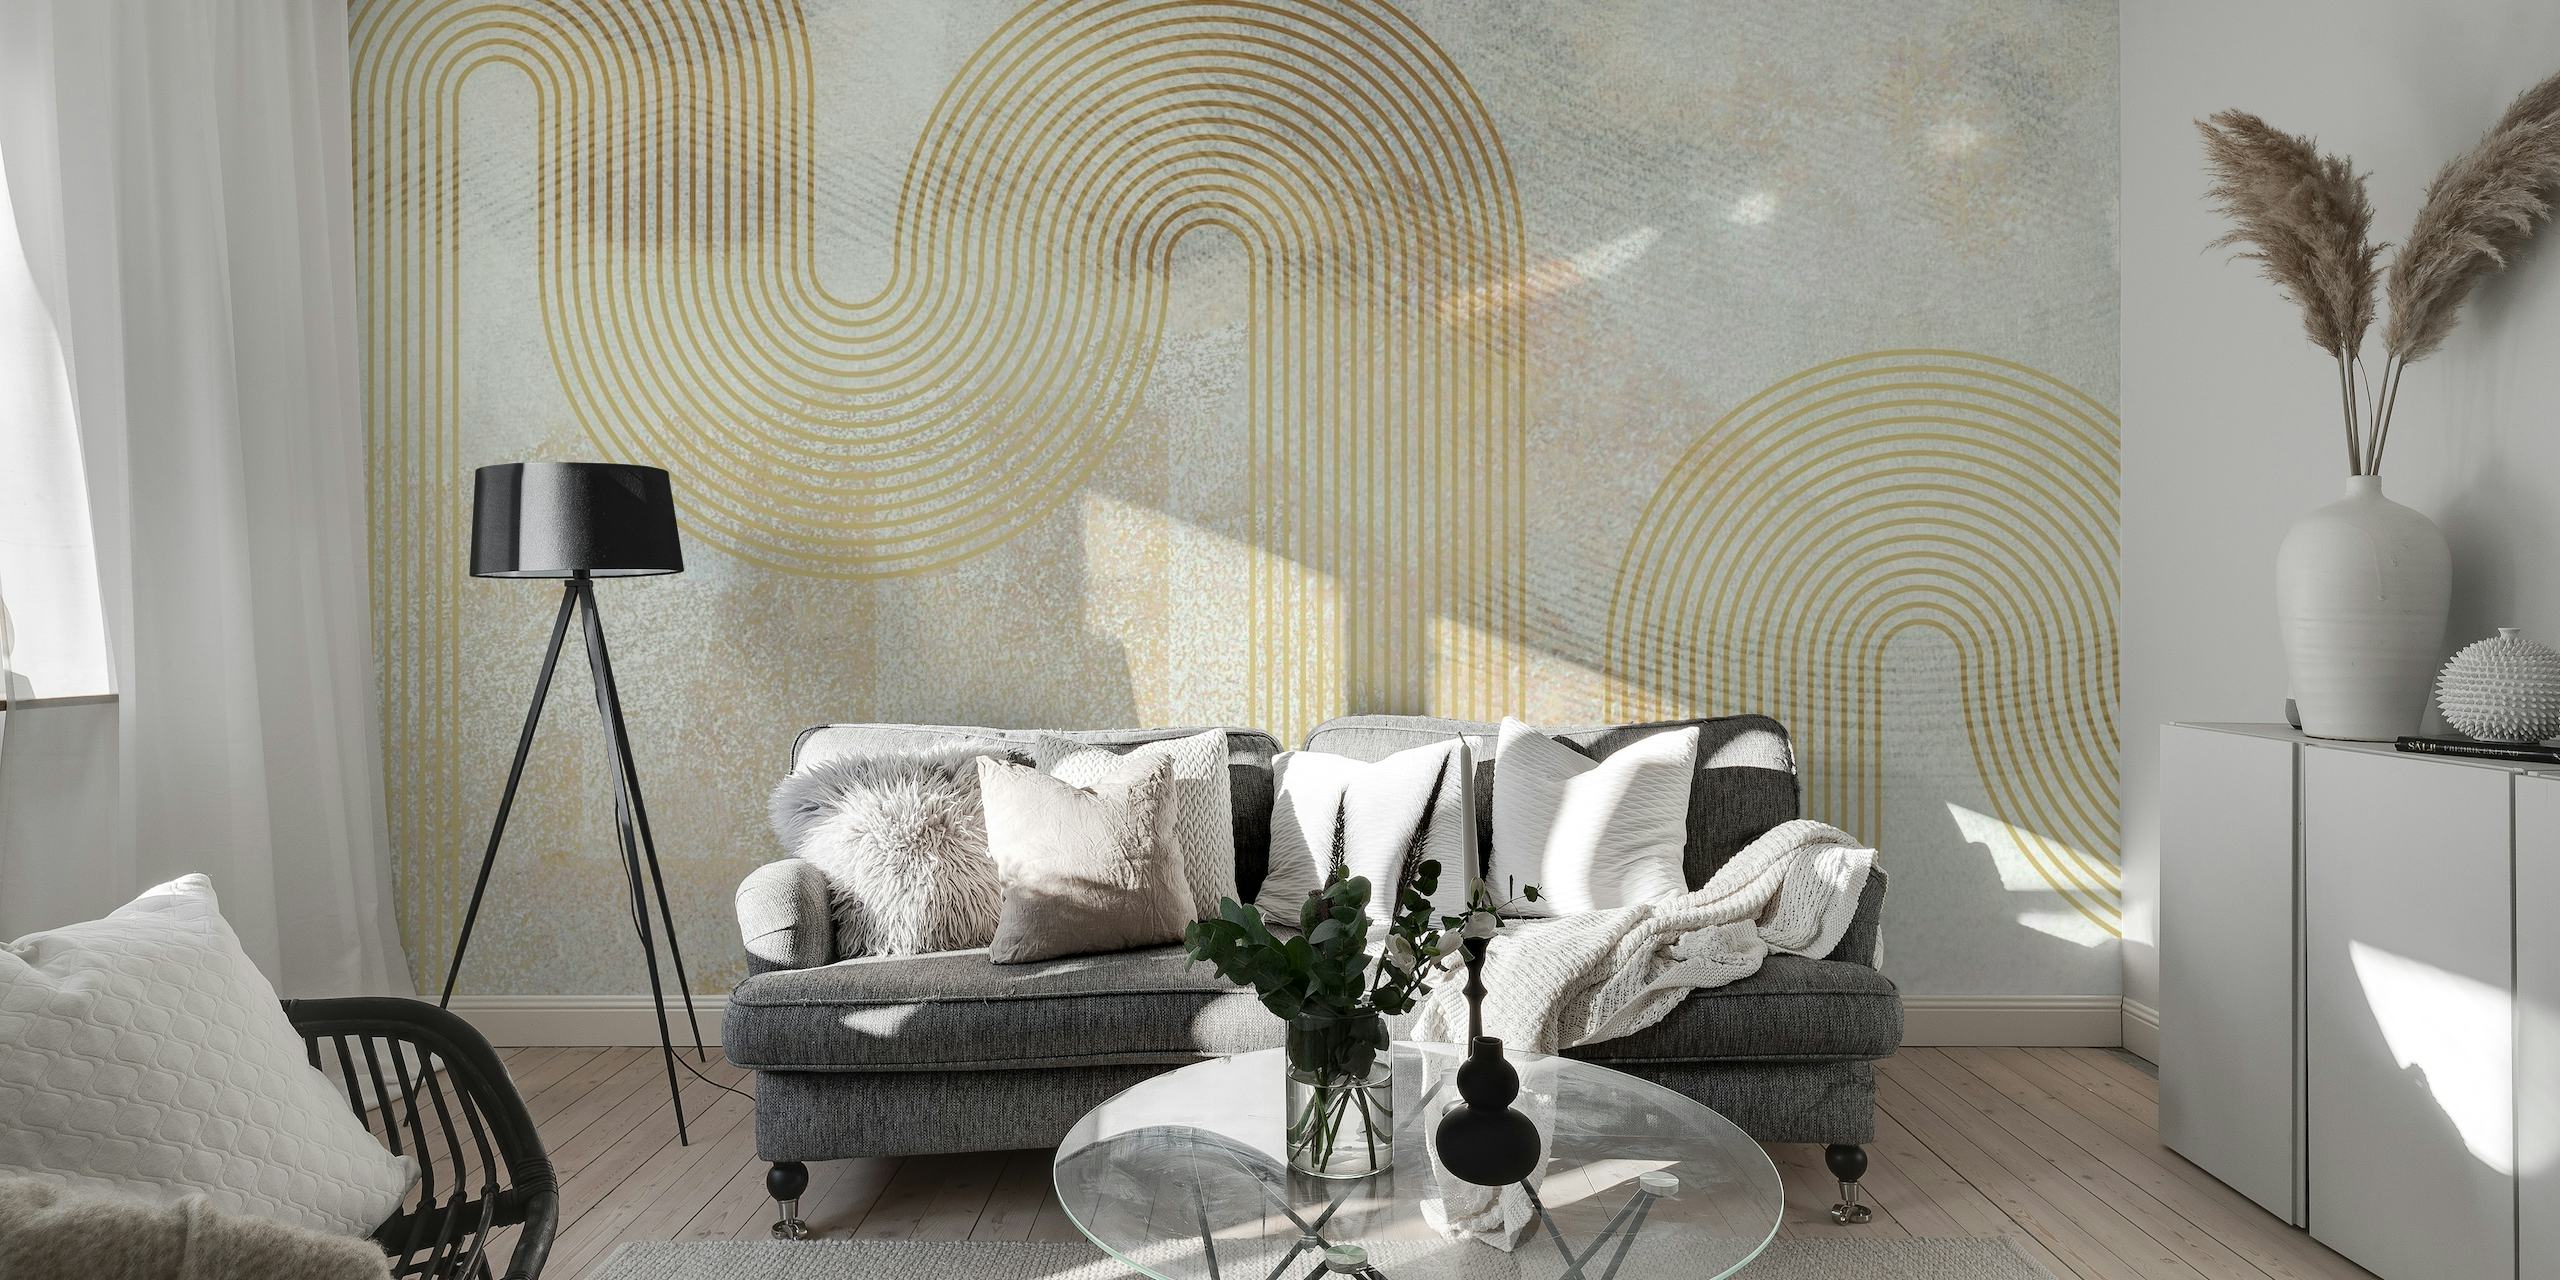 Abstract seventies-style geometric shapes wall mural in neutral tones